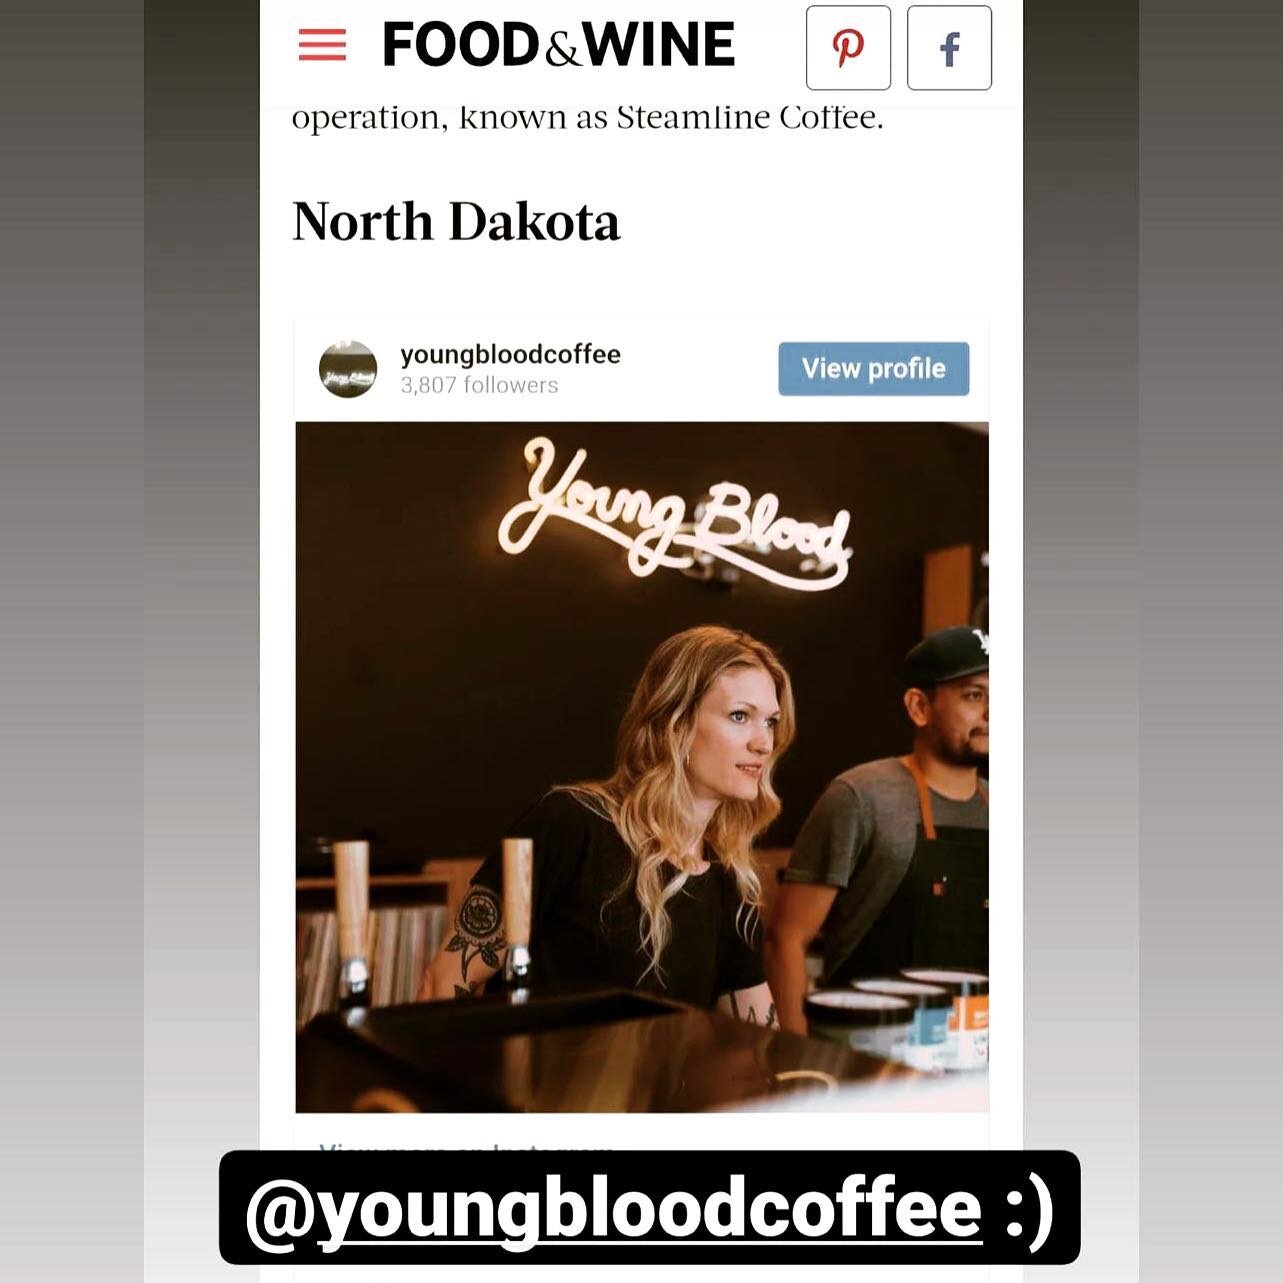 Thanks for the write up Food and Wine. Best Coffee for our state. https://www.foodandwine.com/